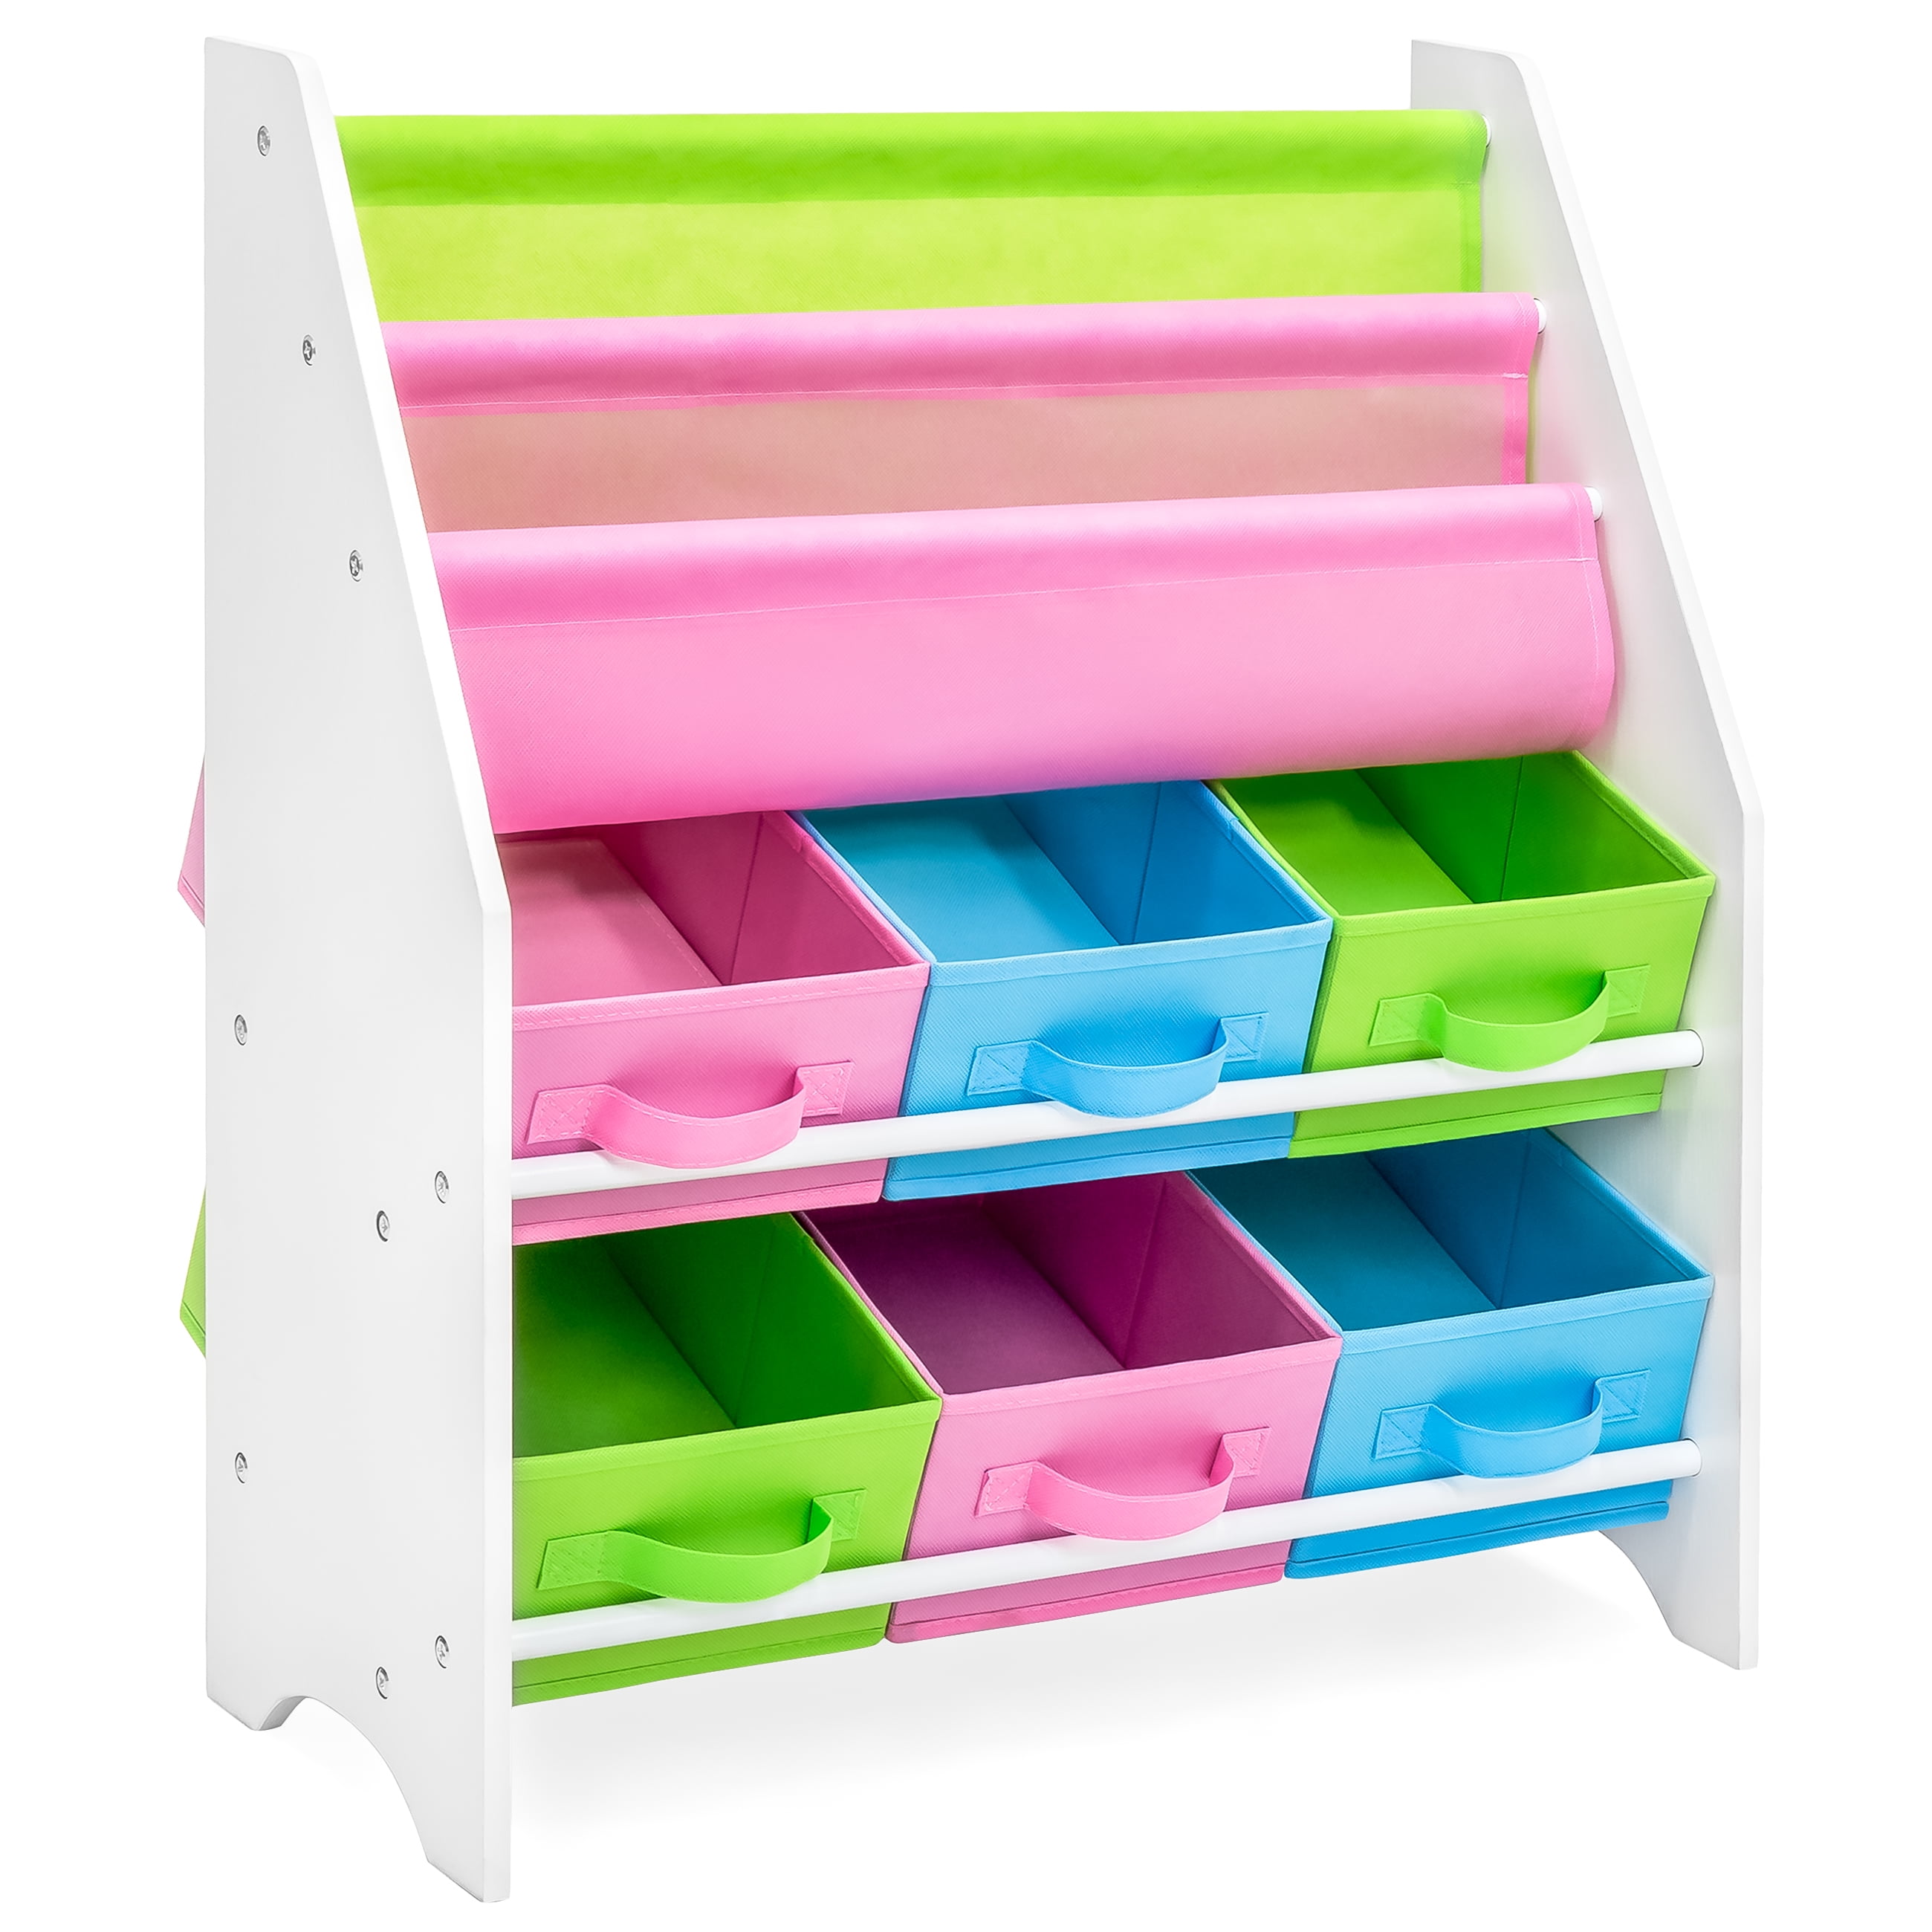 kids toy and book storage